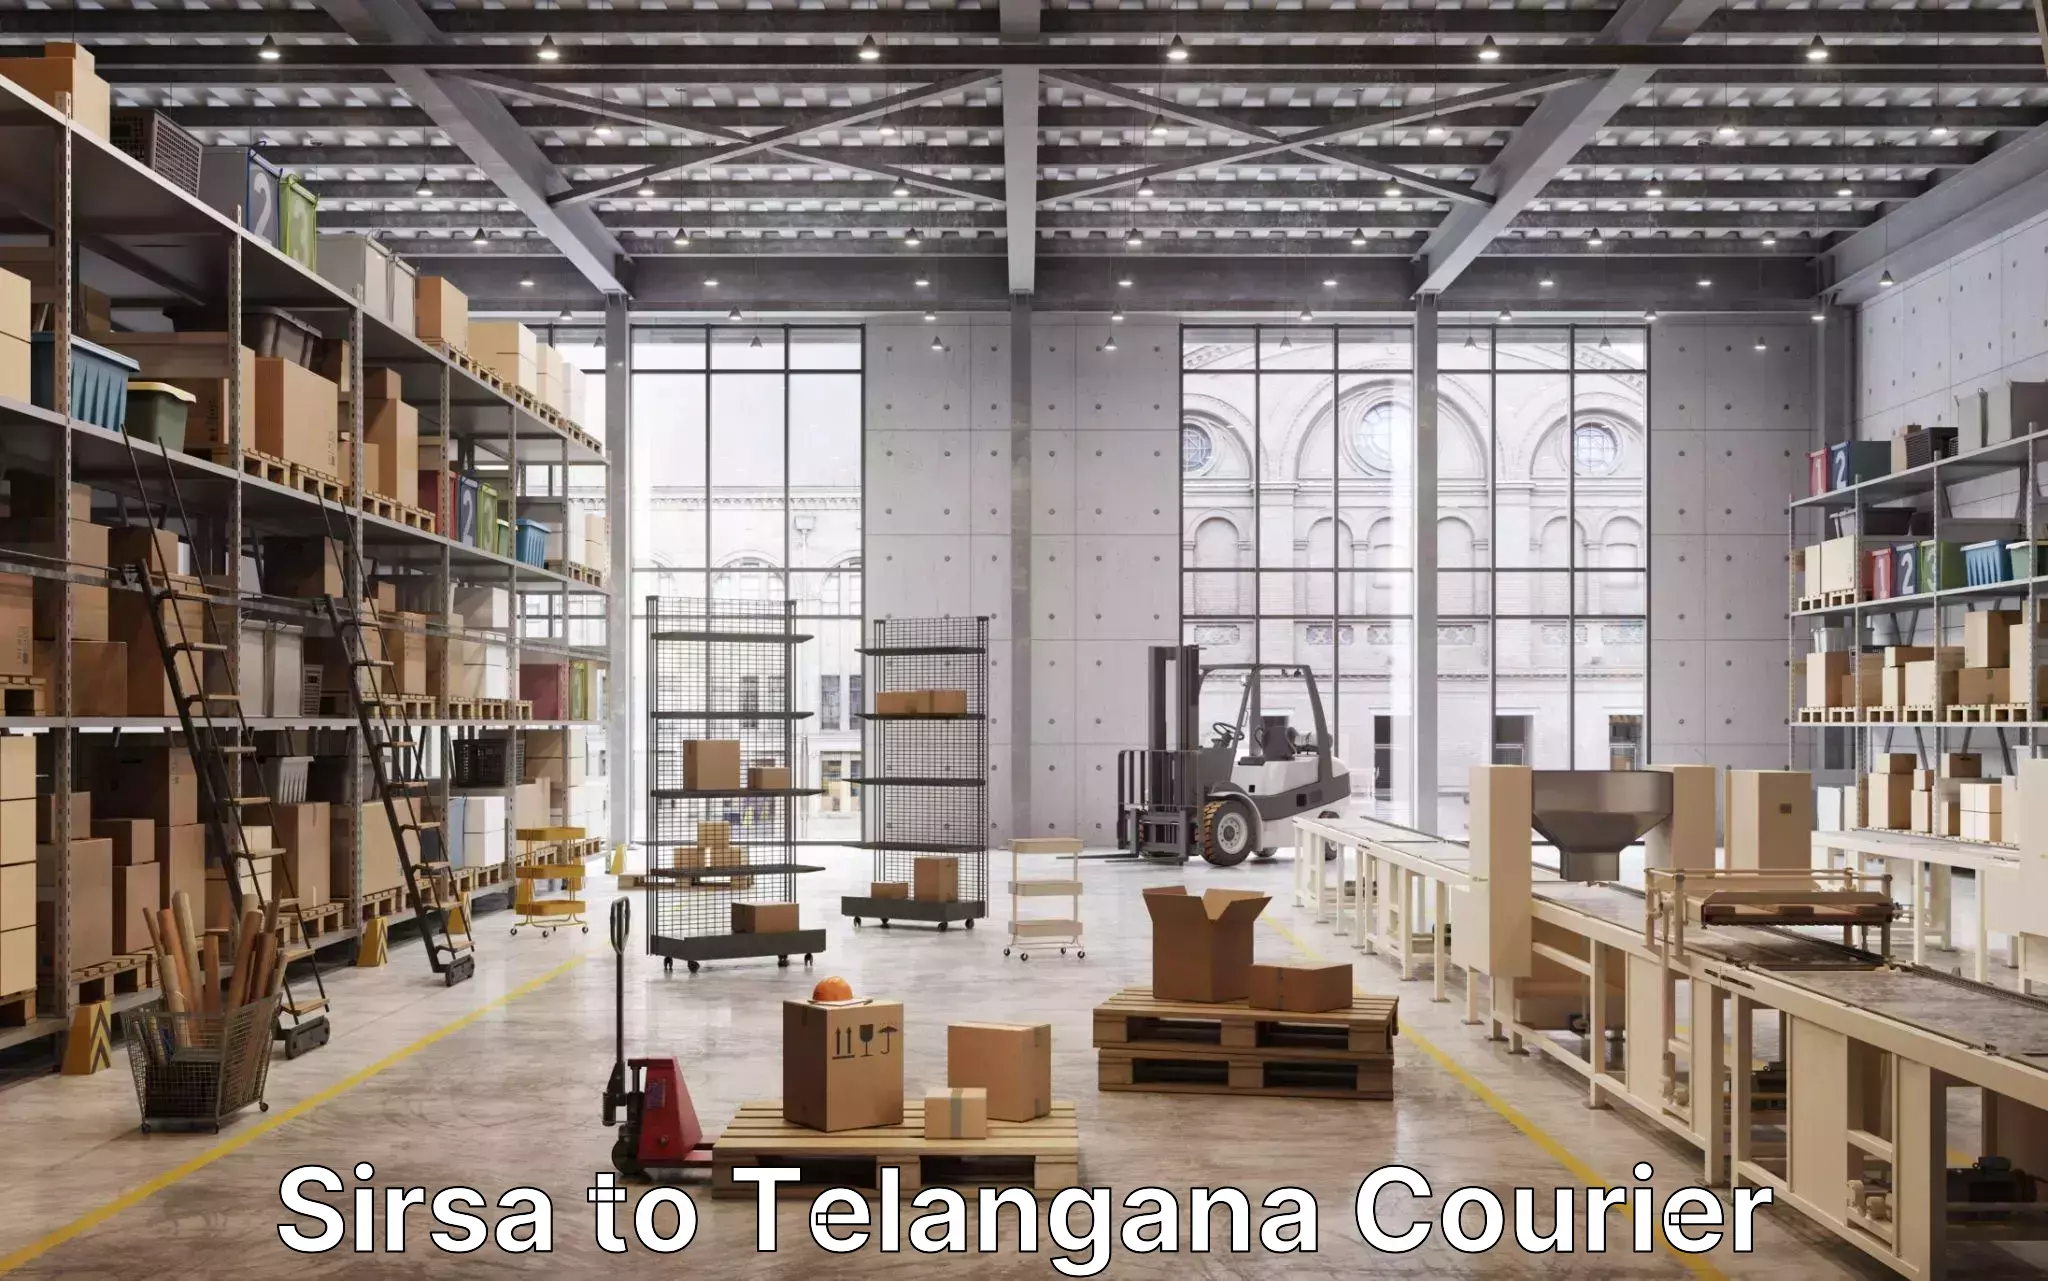 Trusted relocation experts Sirsa to Telangana